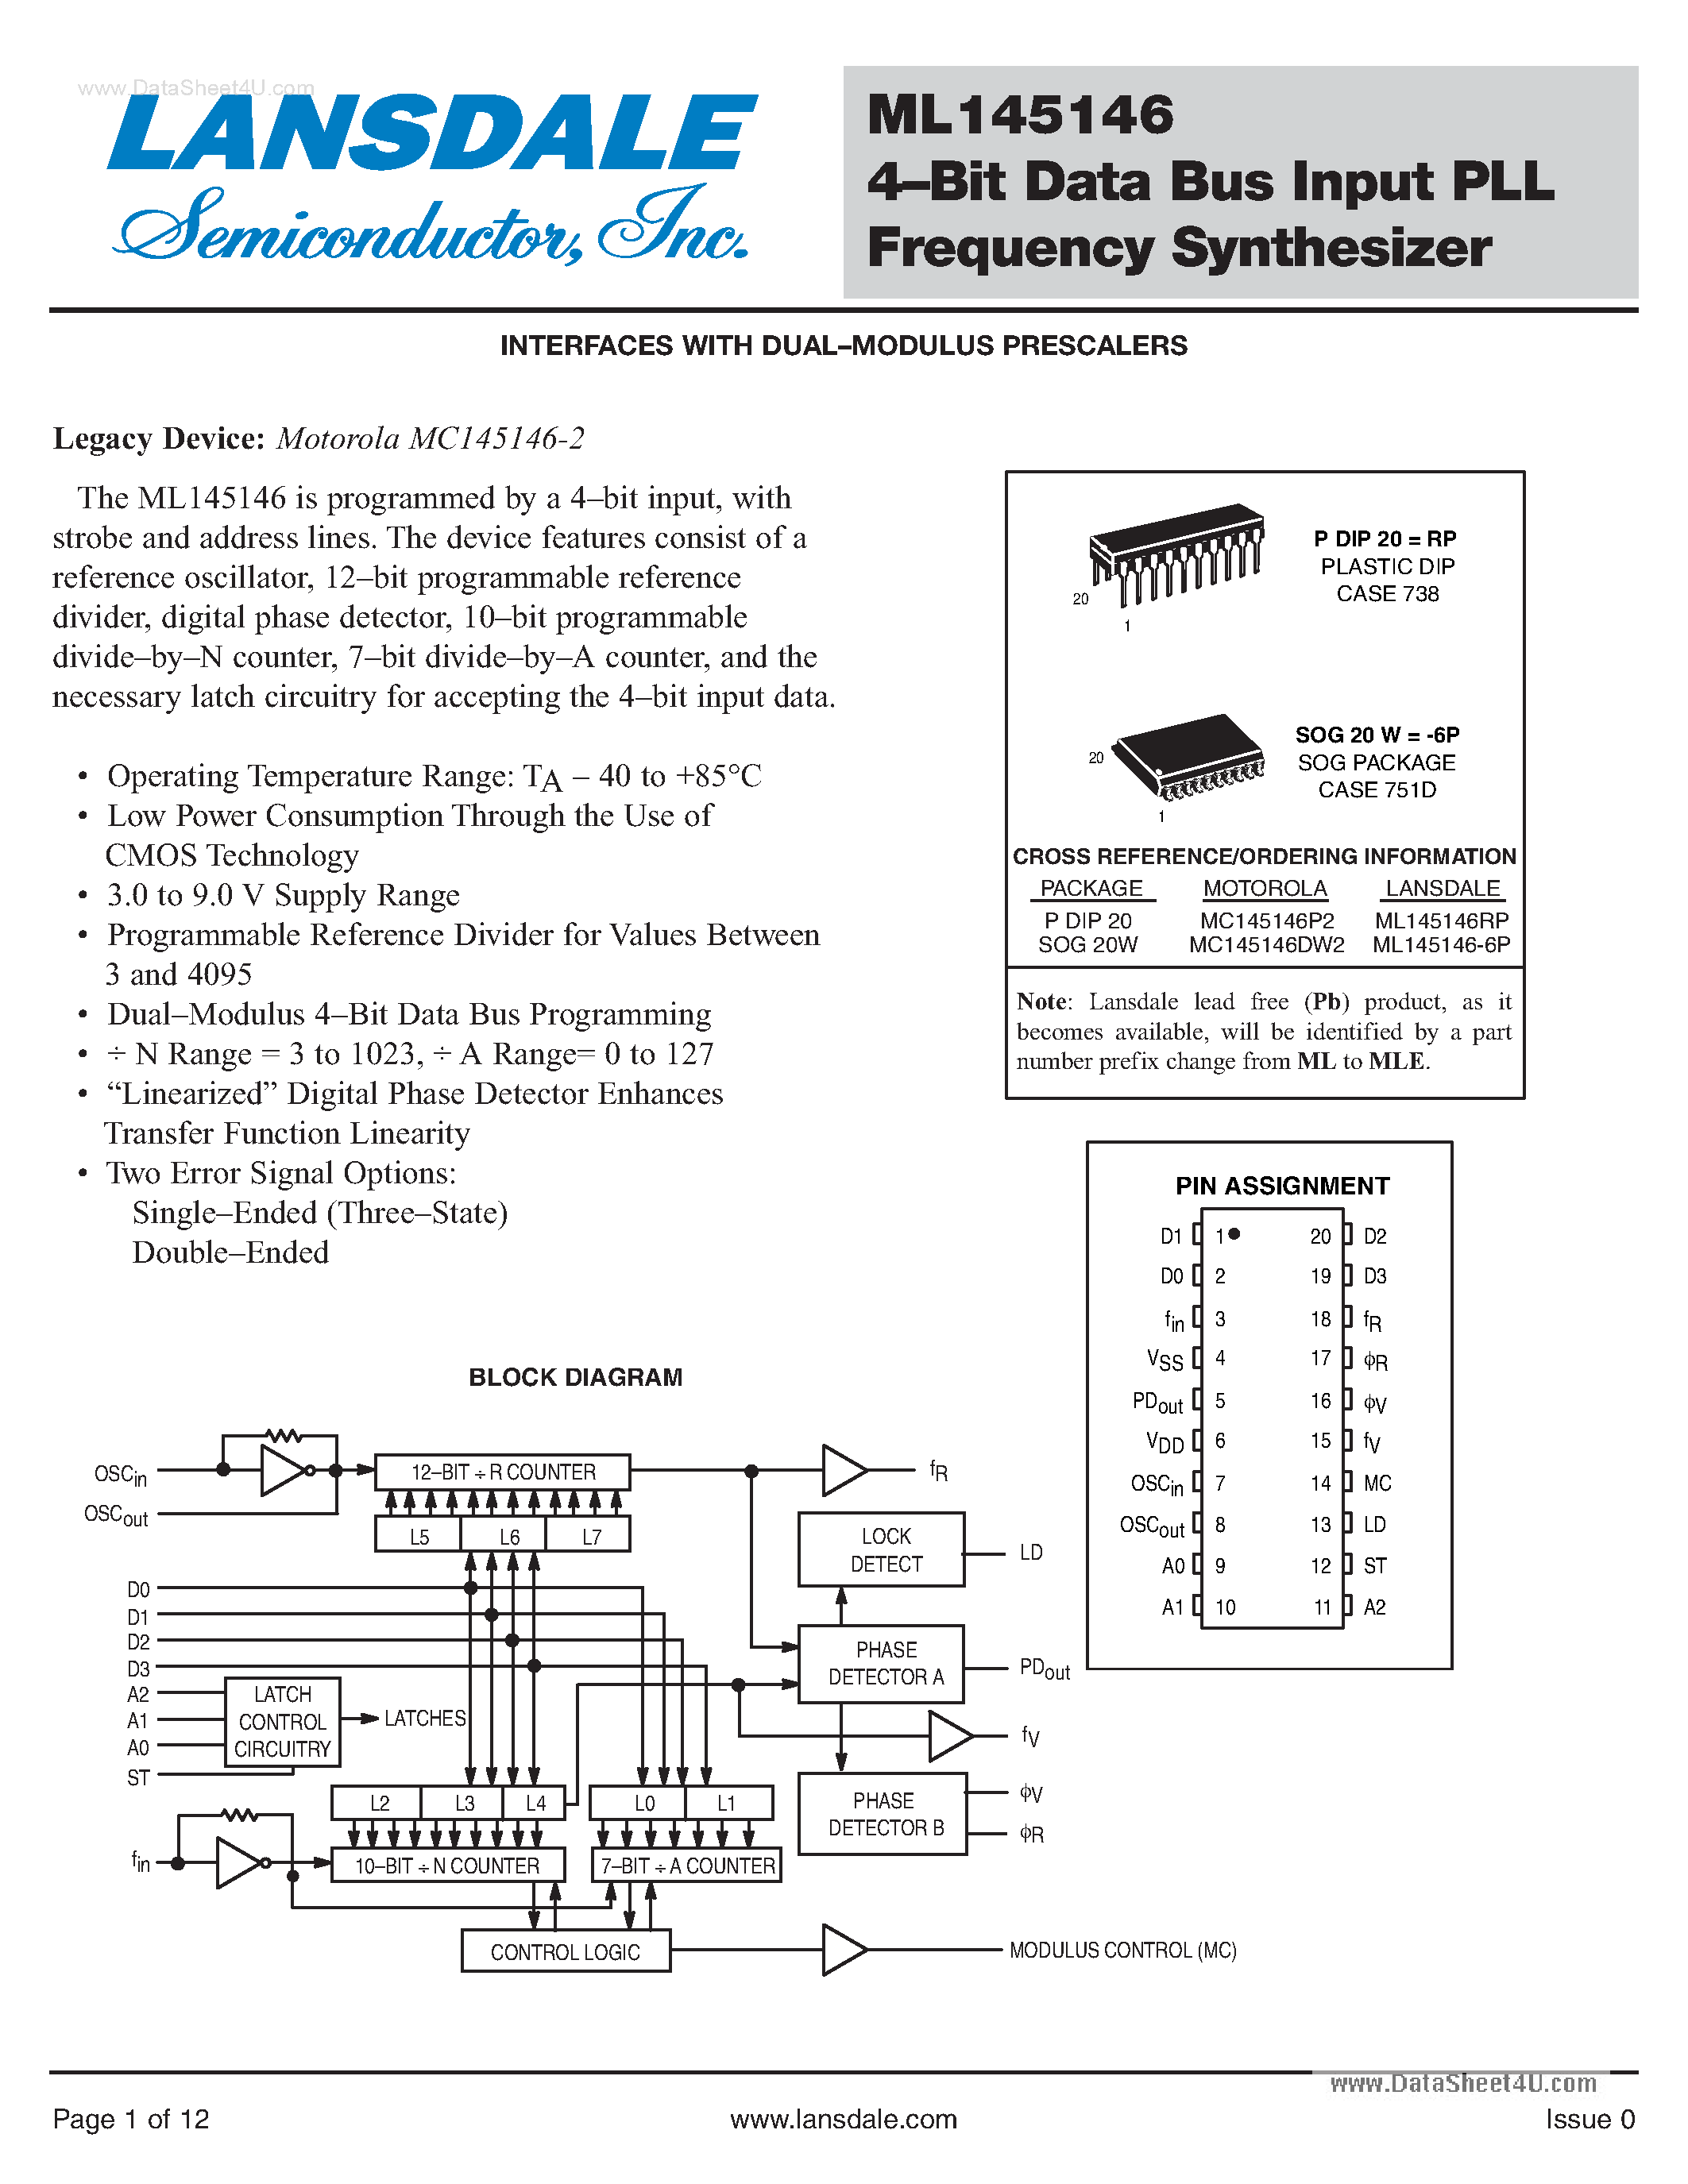 Datasheet ML145146 - 4-Bit Data Bus Input PLL Frequency Synthesizer page 1